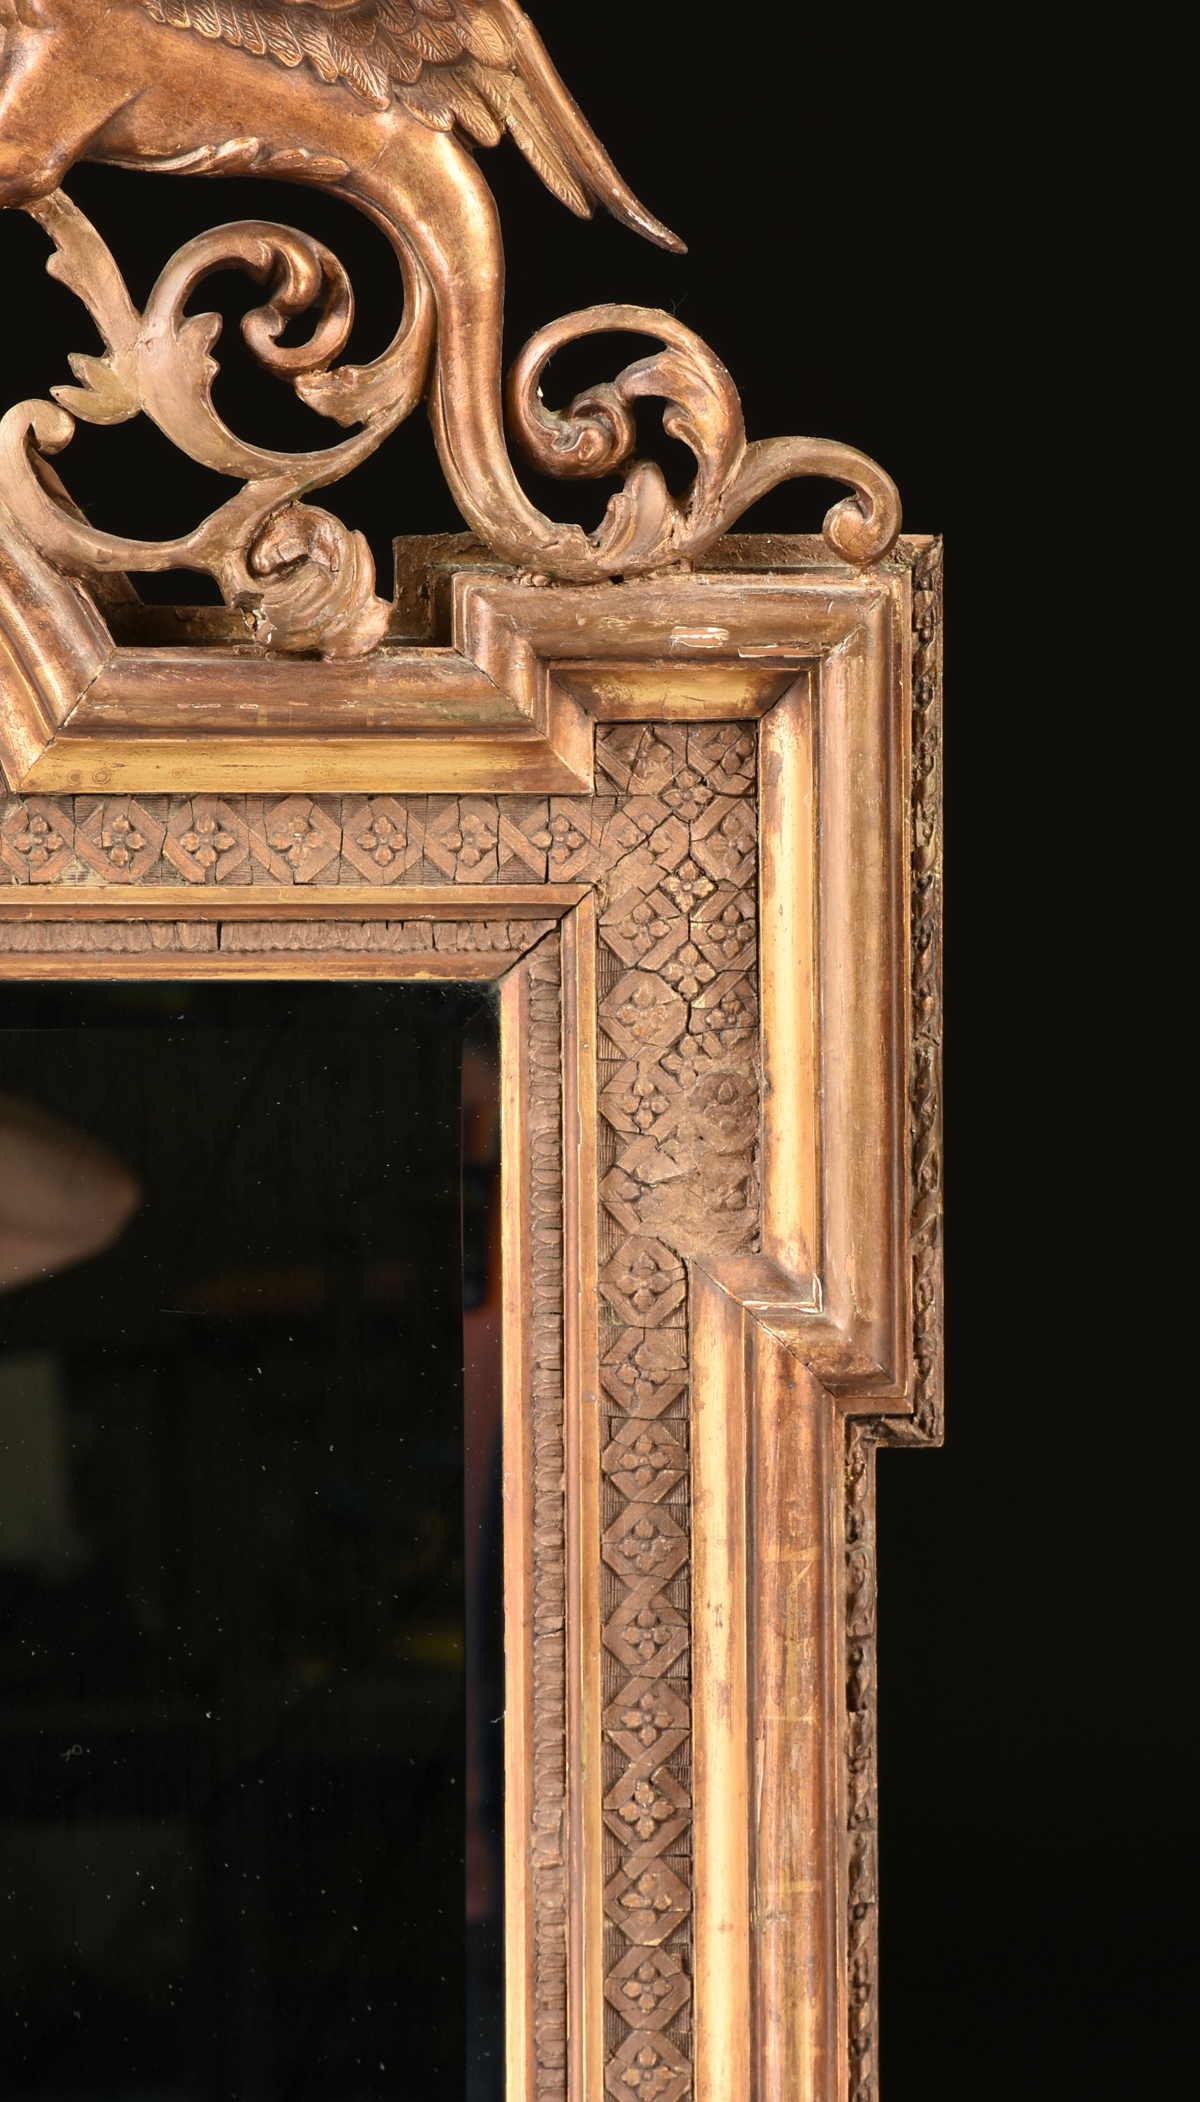 A RENAISSANCE REVIVAL GILT AND CARVED WOOD PIER MIRROR, FRENCH, THIRD QUARTER 19TH CENTURY, with a - Image 3 of 5